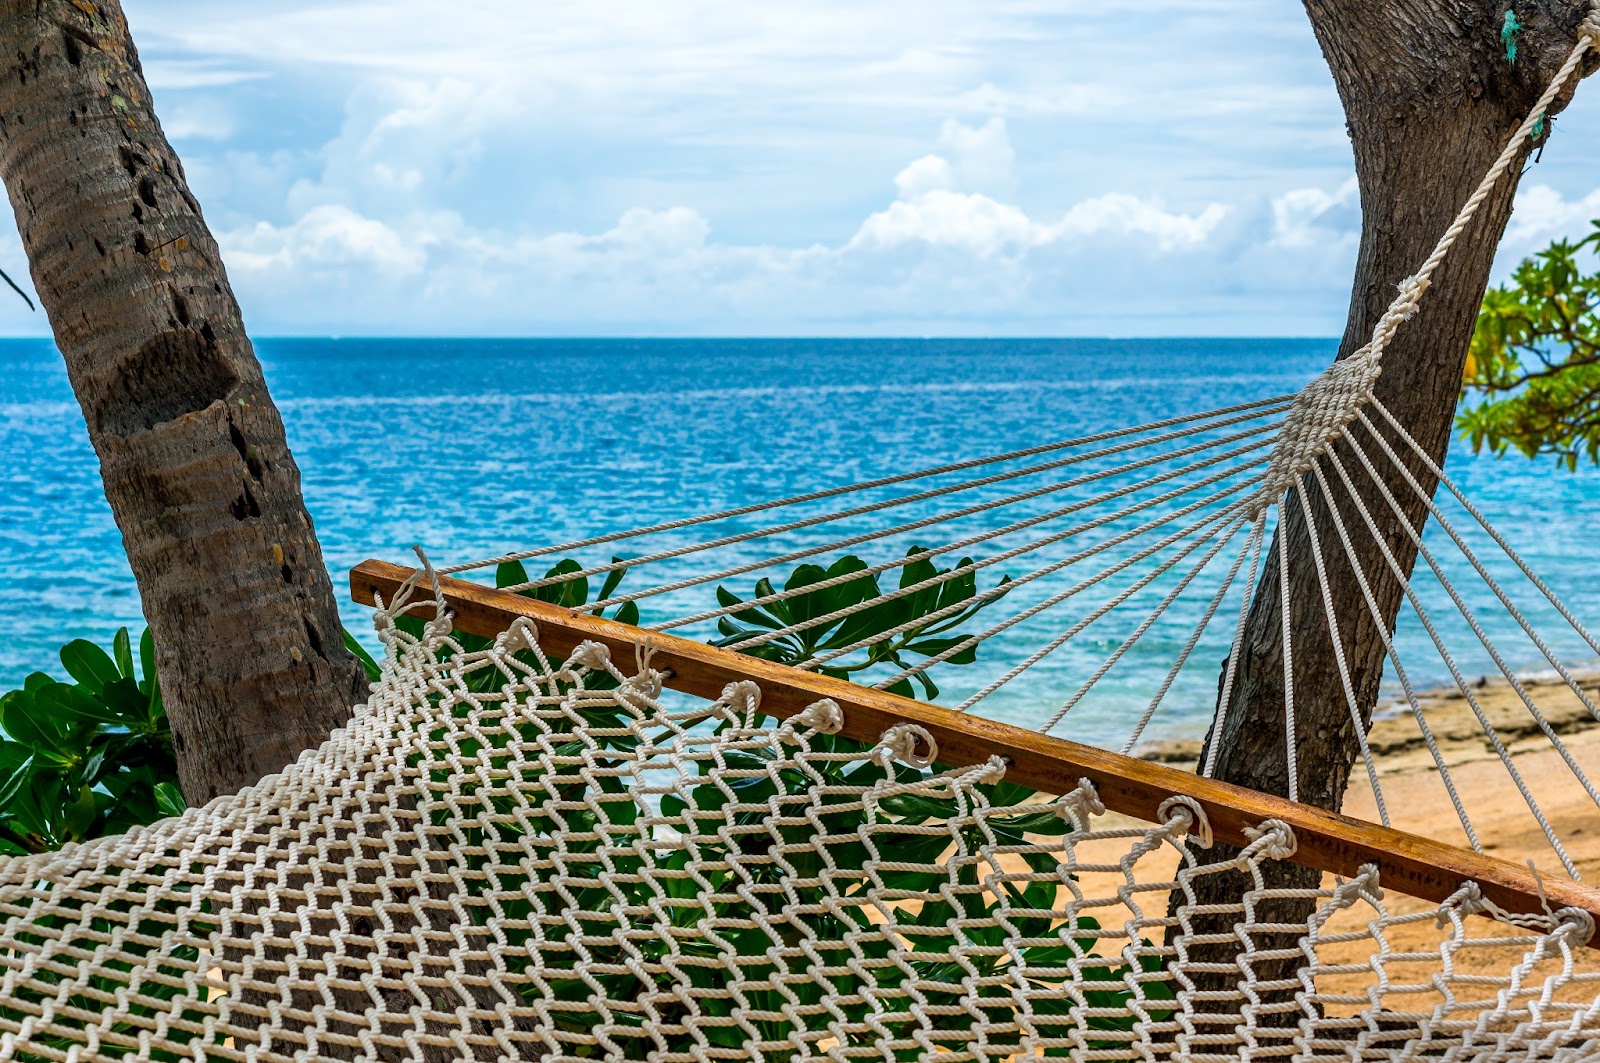 A hammock over looking the beautiful waters and a luxurious beach in Fiji.